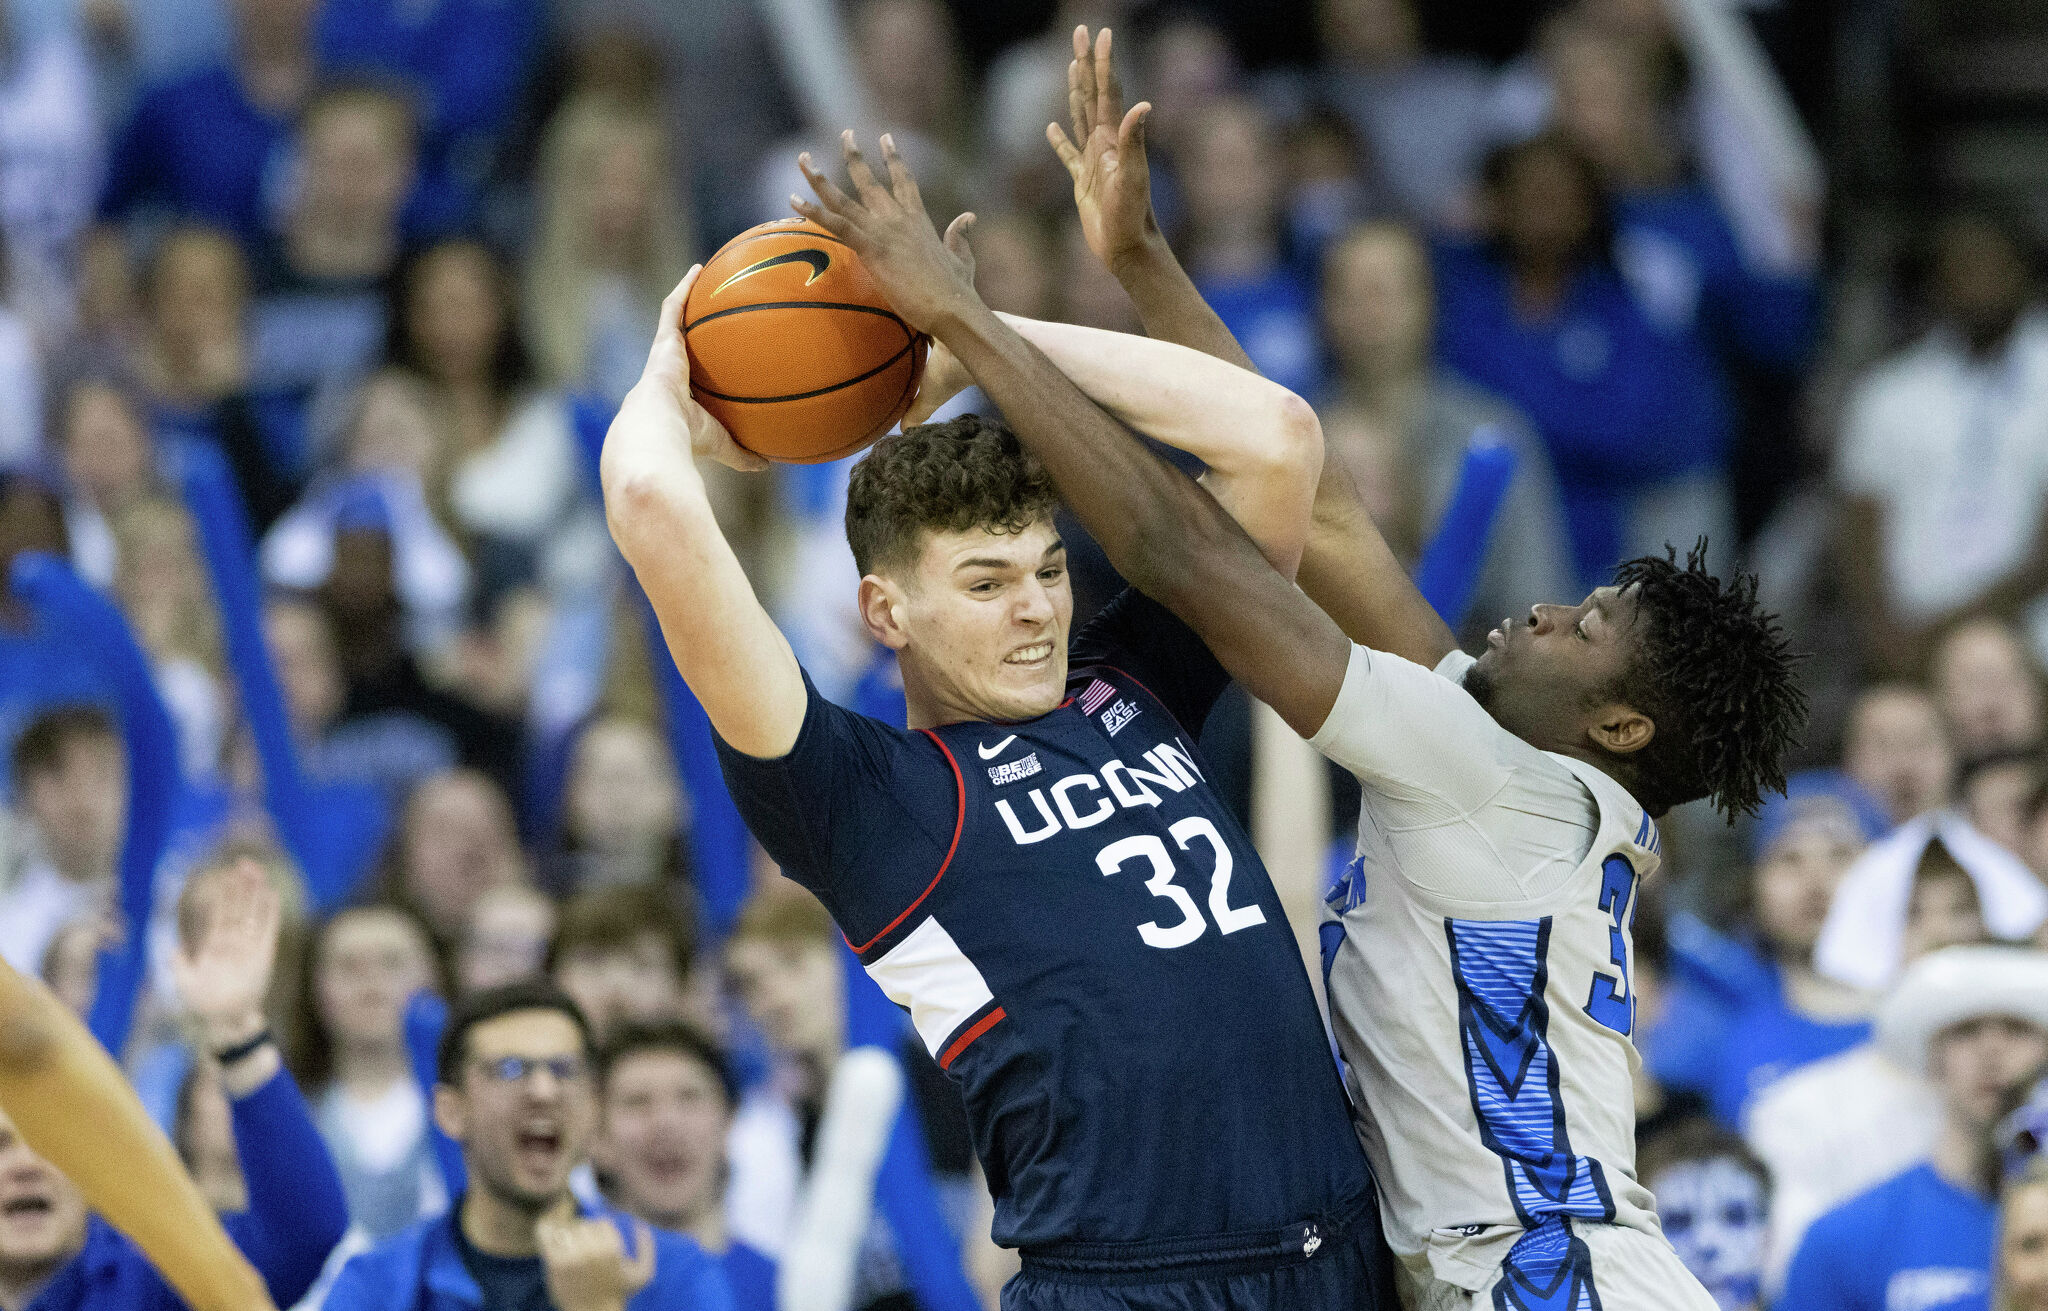 NCAA champion UConn men will reportedly face North Carolina